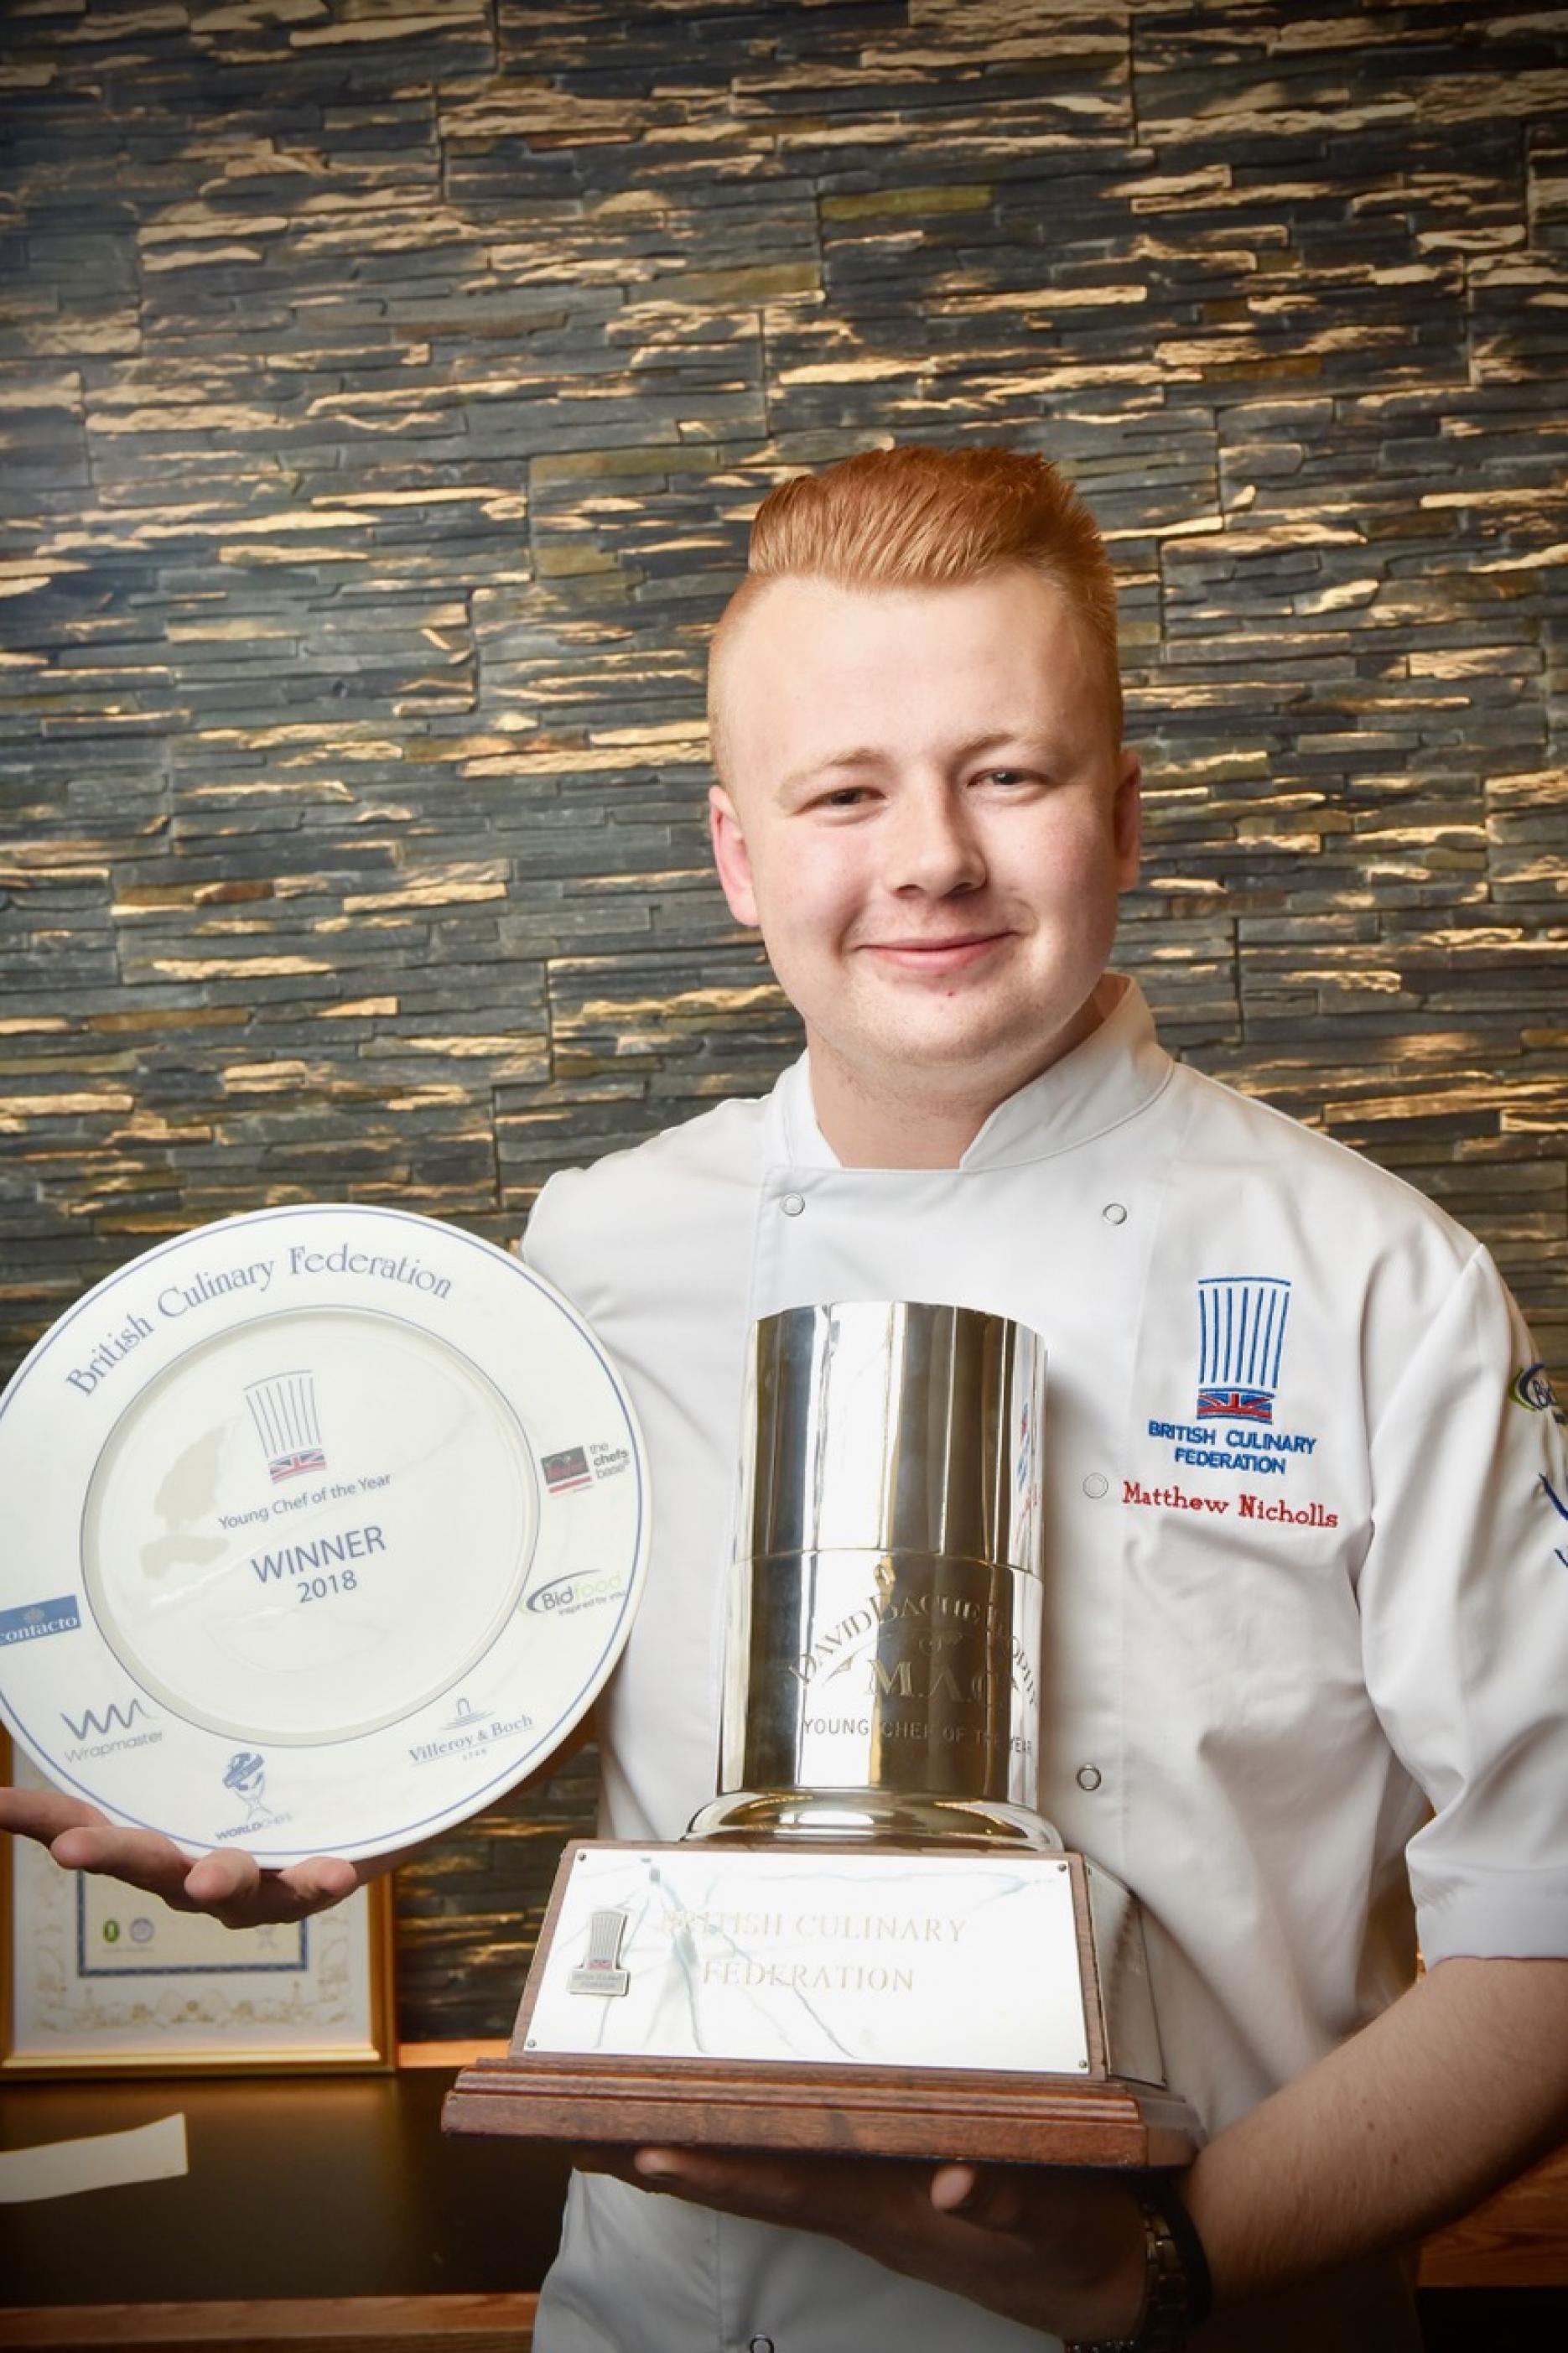 British Culinary Foundation names Young Chef of the Year Craft Guild